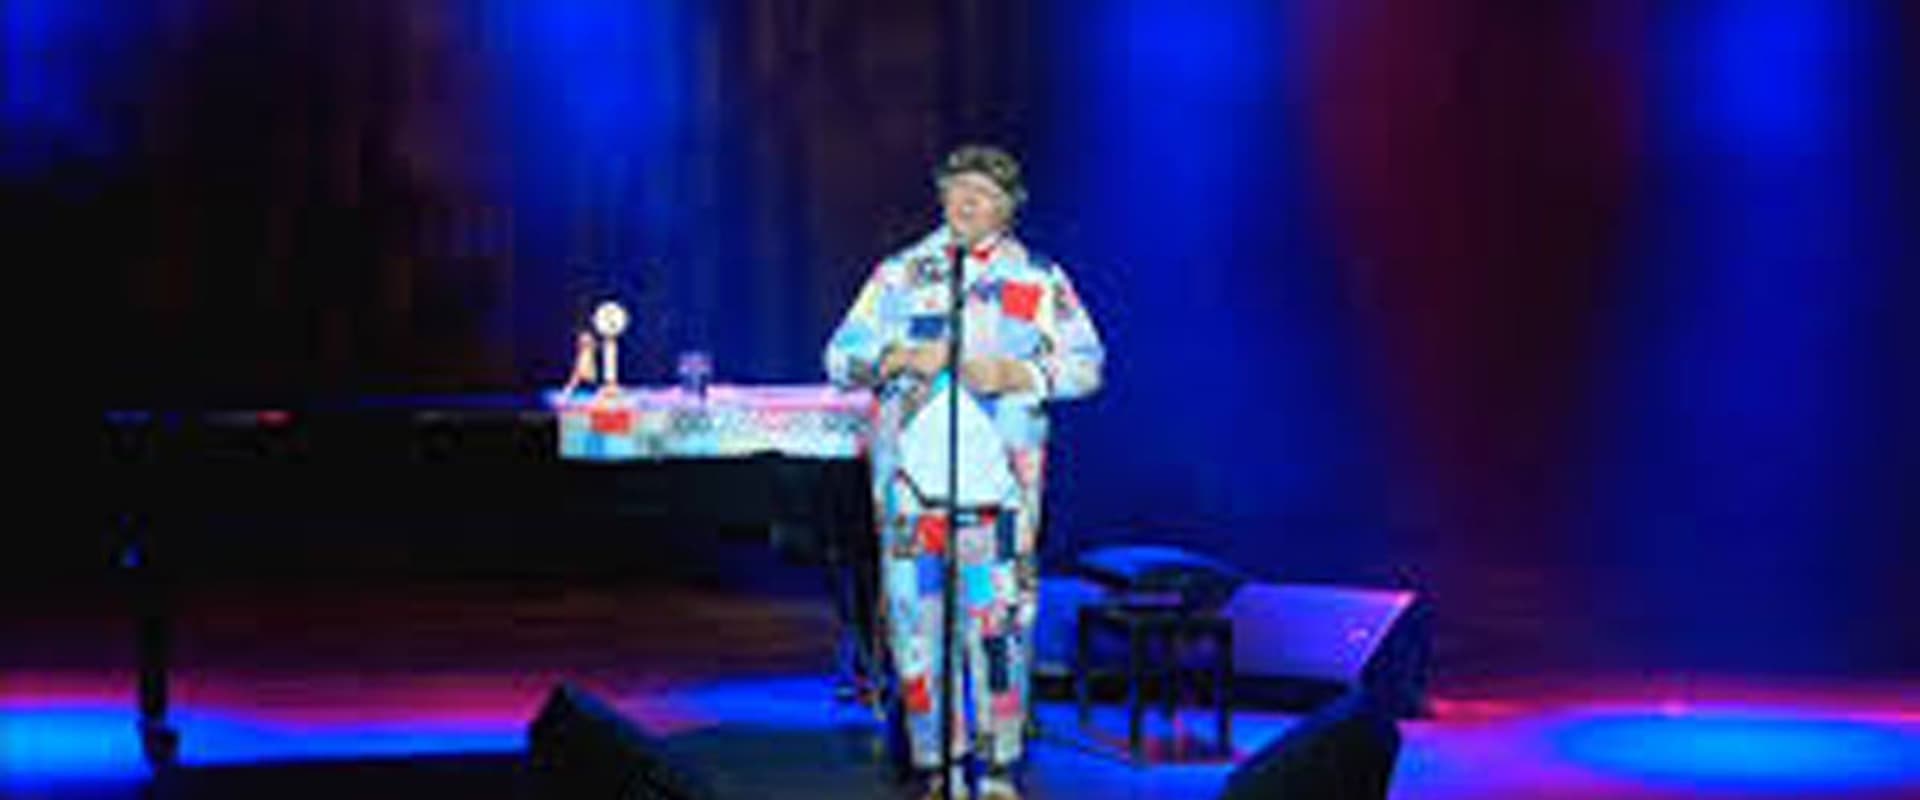 Roy Chubby Brown - 50 Shades Of Brown